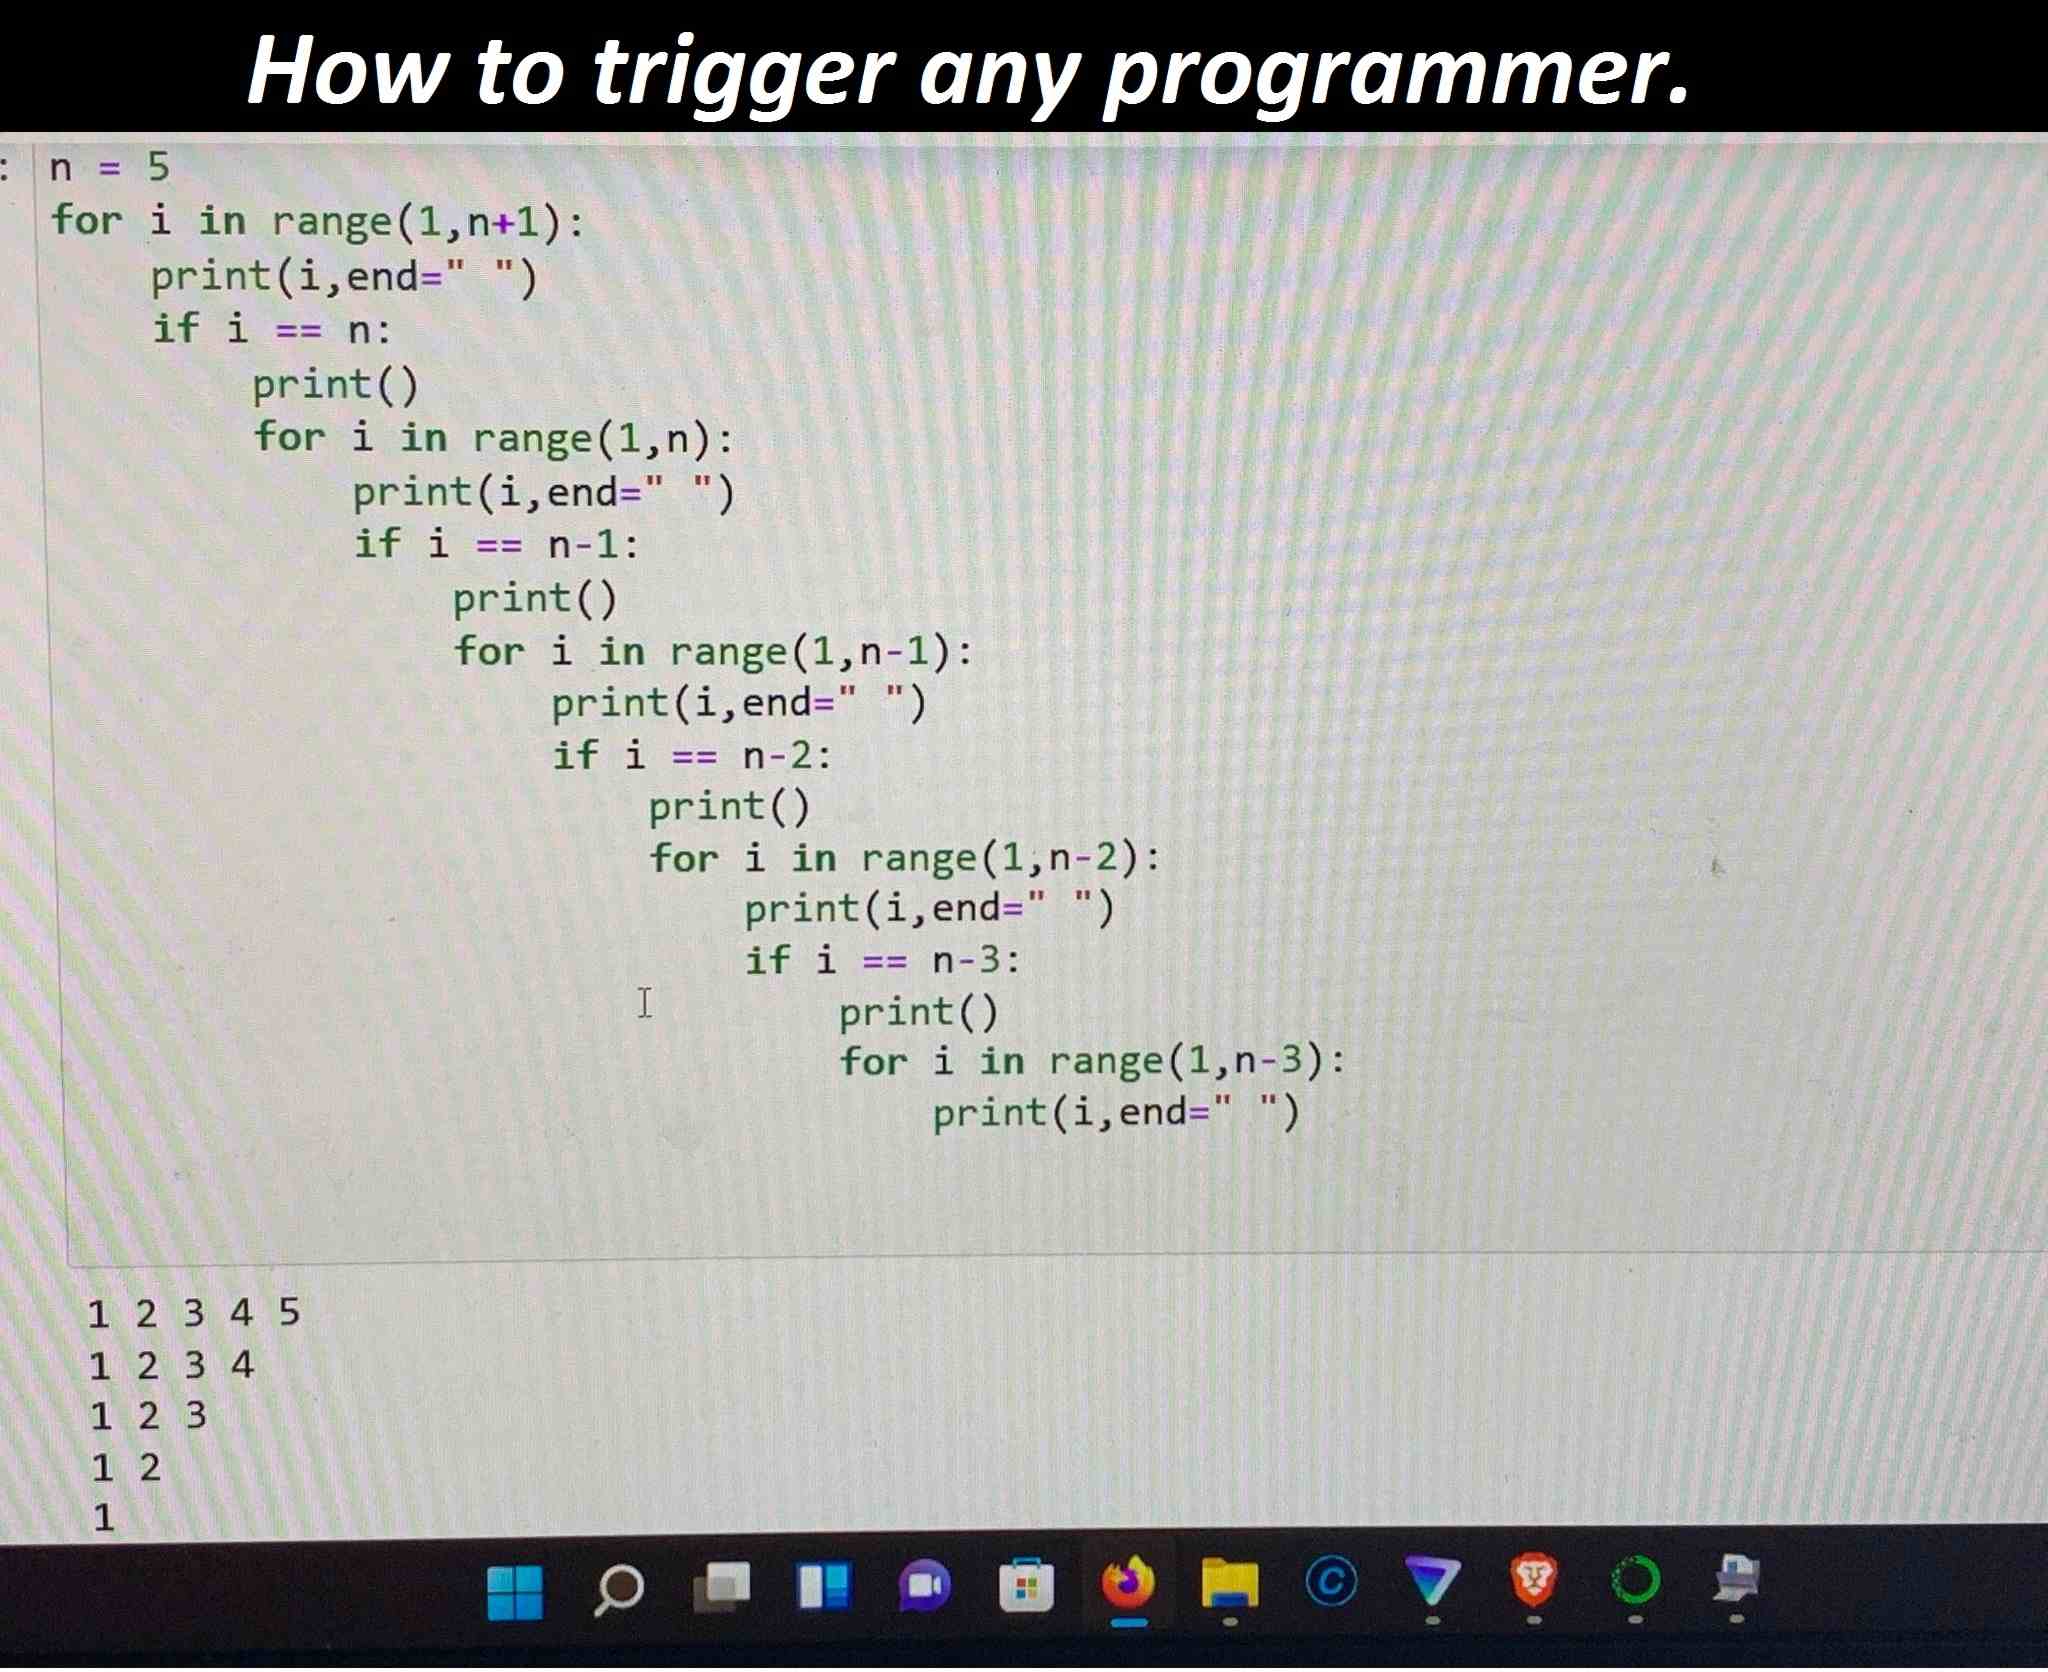 How to trigger any programmer